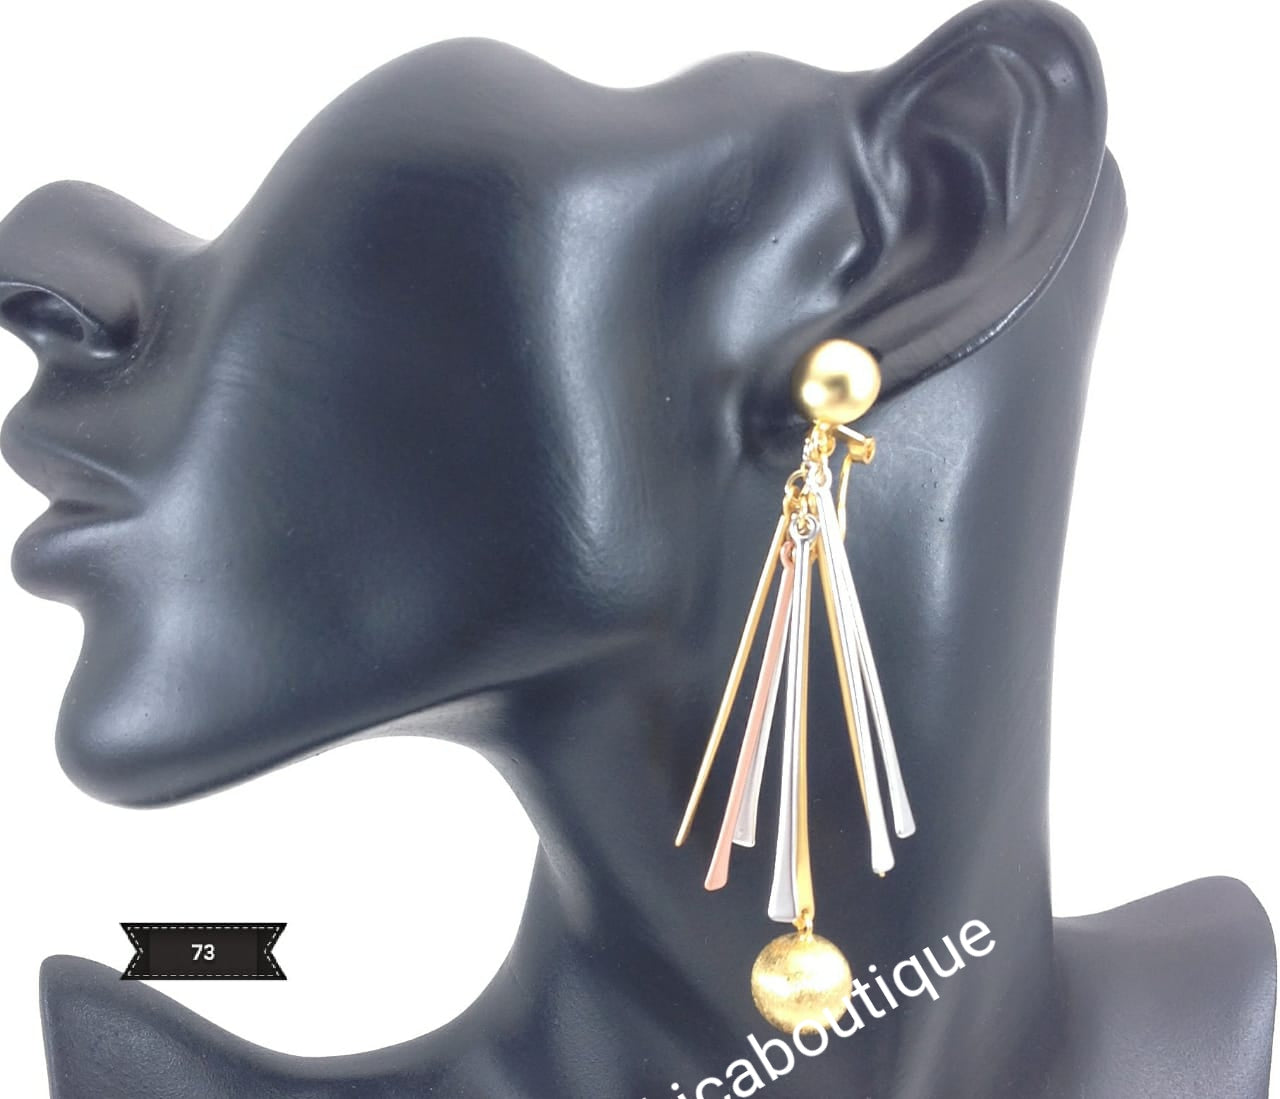 Latest drop-earrings in 3 tone electroplating. Top quality made hypoallergenic. Long lasting. Light weight earrings